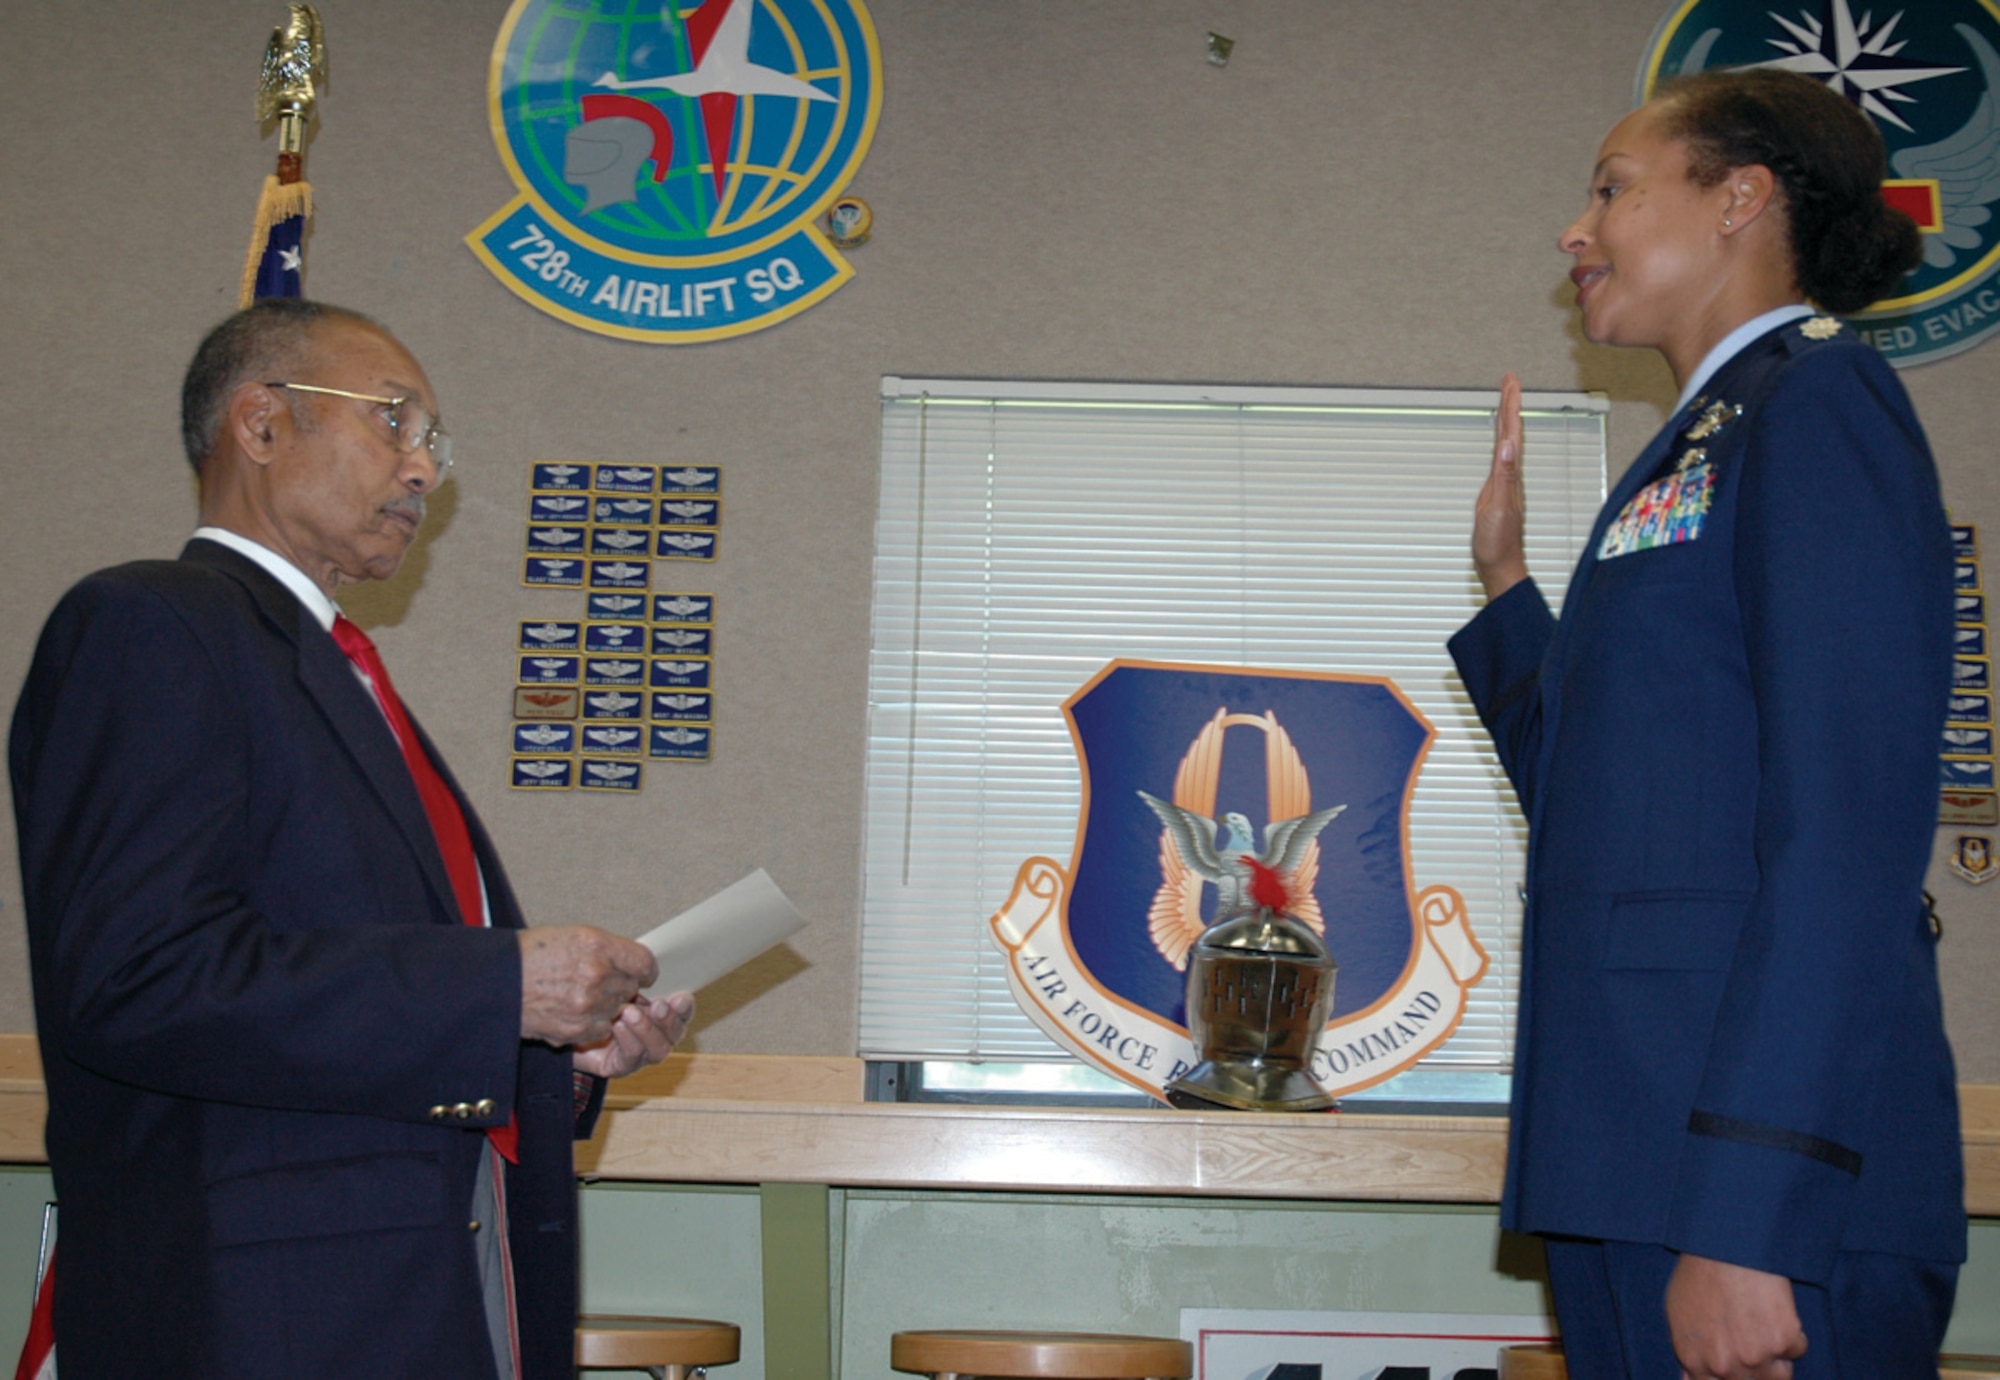 Retired Lt. Col. Edward Drummond, an original member of the Tuskegee Airmen, administers the oath of office to Lt. Col. Kimberly Scott, 728th Airlift Squadron, during her promotion ceremony October 3, 2009 at McChord Air Force Base. "Members of the Tuskegee Airmen have mentored, encouraged, and supported me over the years," said Colonel Scott. "It was incredibly meaningful to me to have been sworn in by Colonel Drummond."